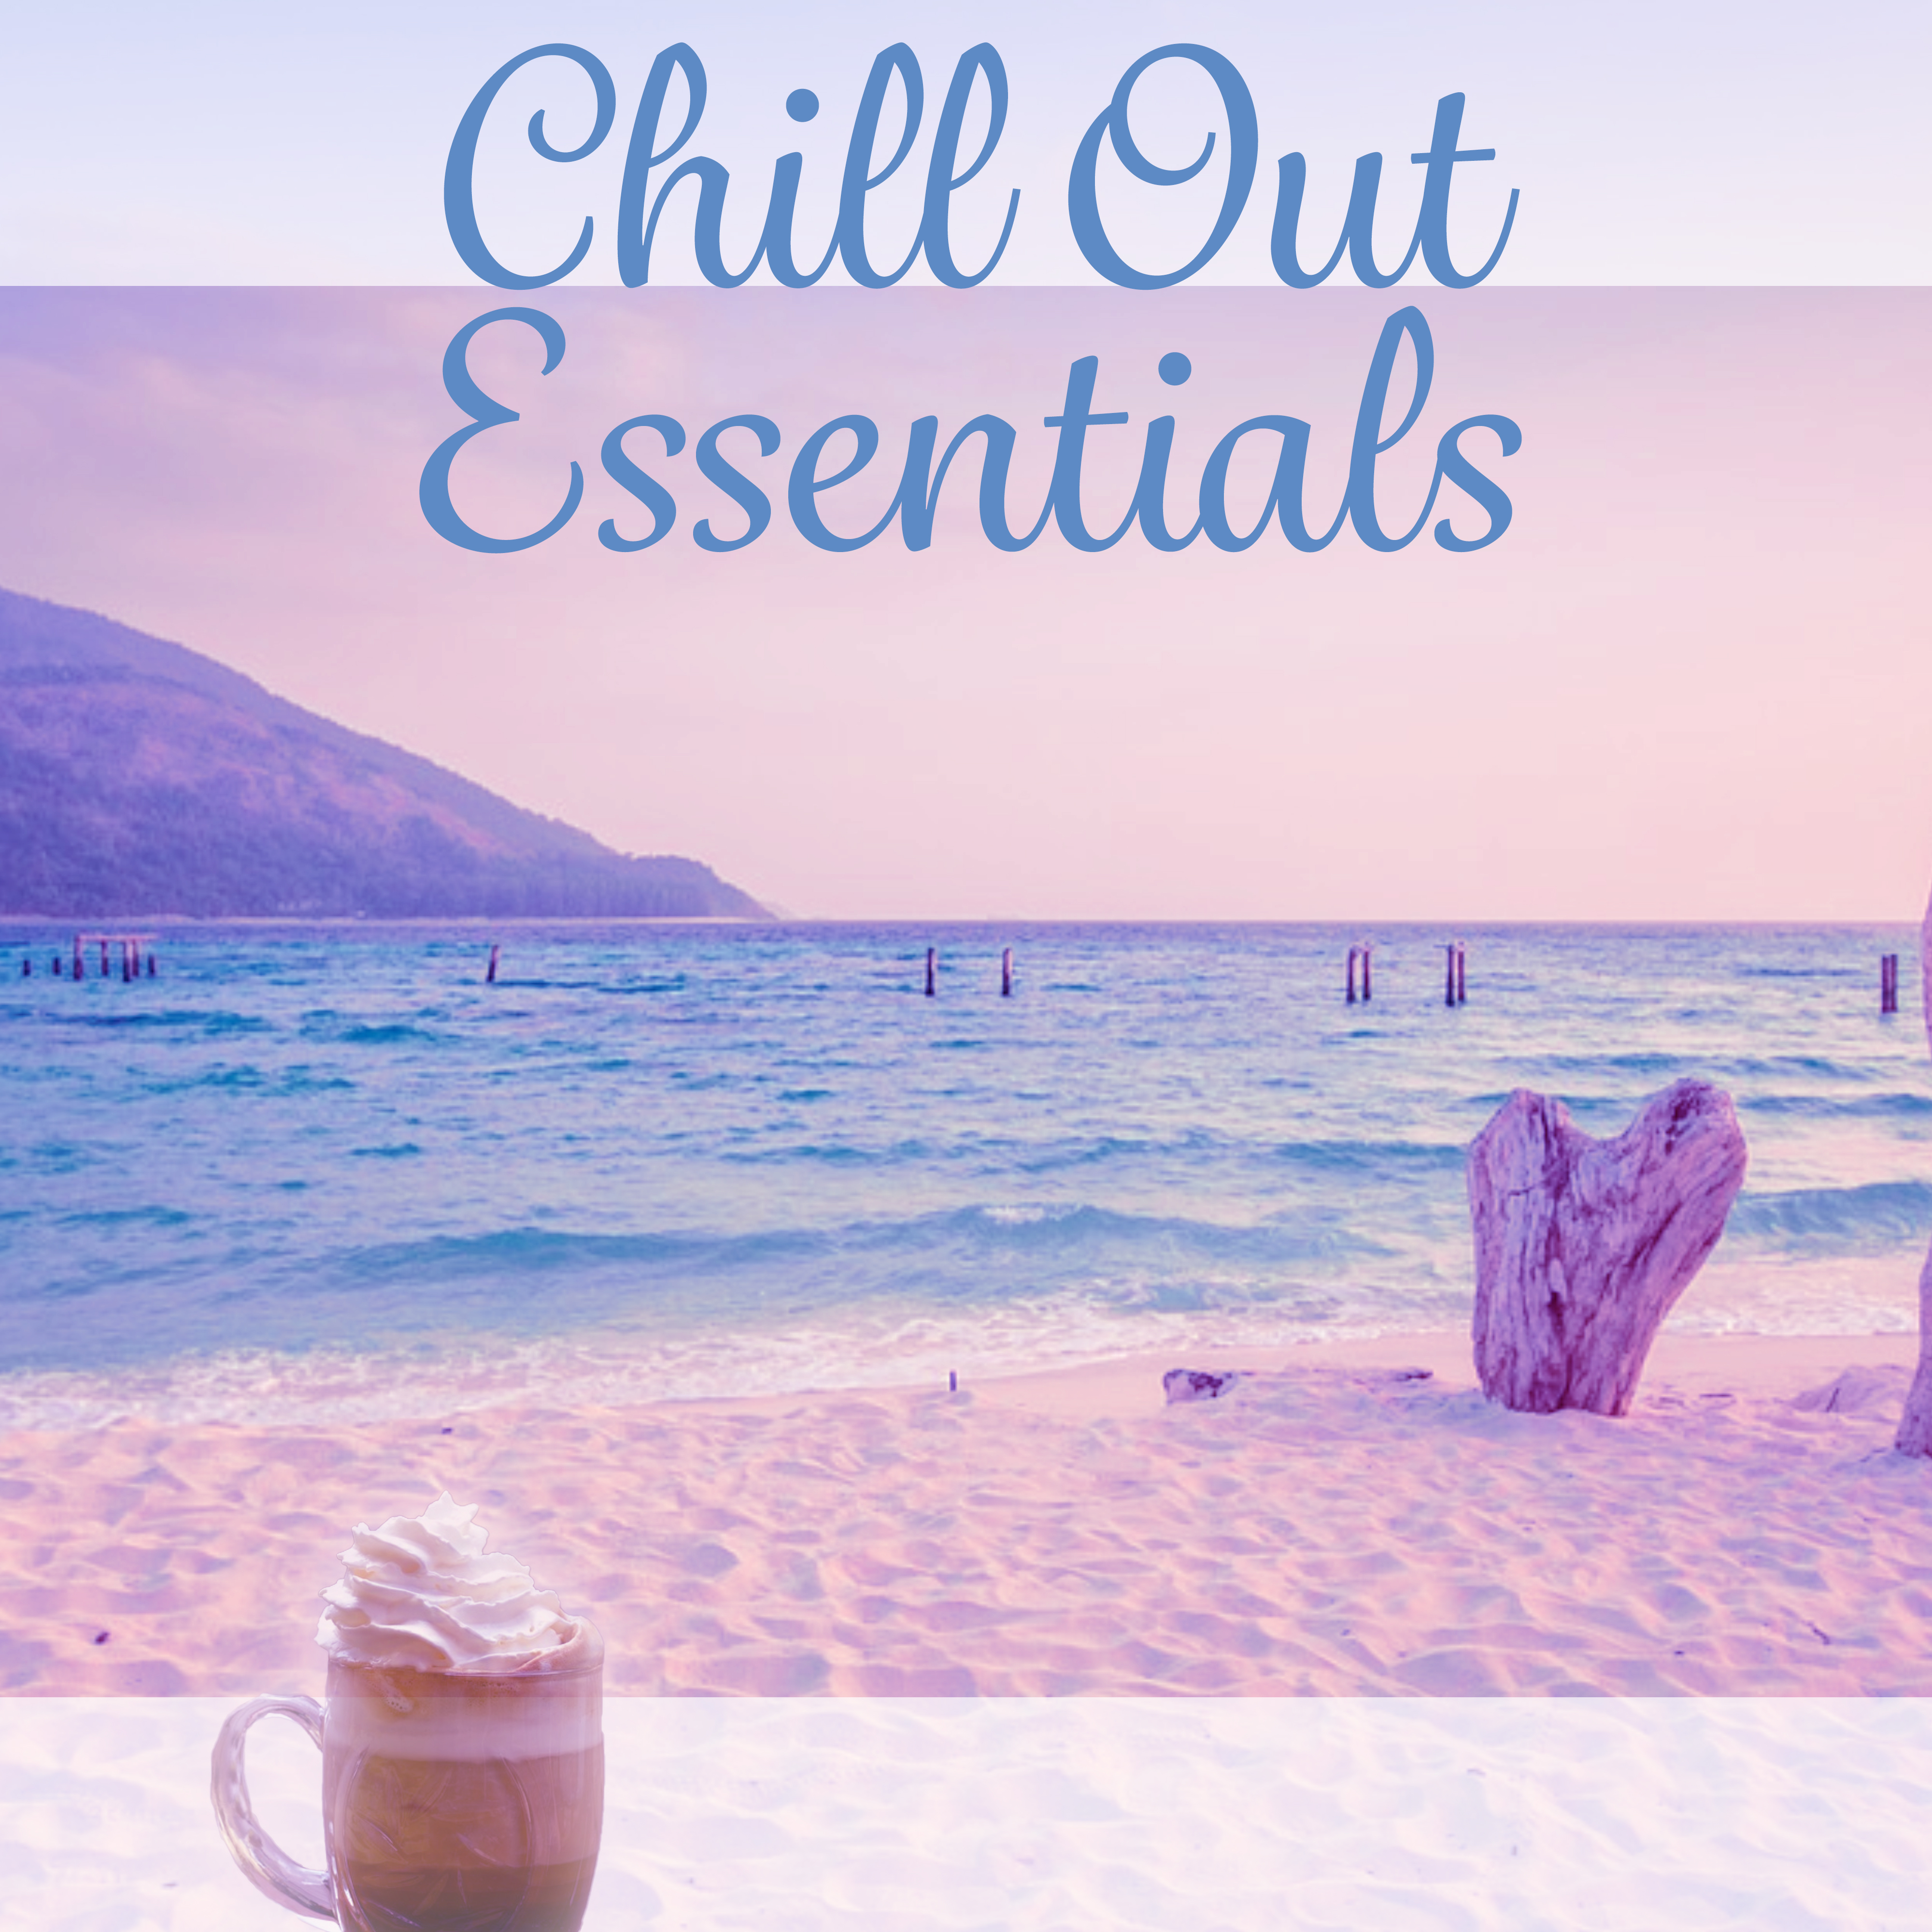 Chill Out Essentials  Beach Music, Deep Vibes of Chill Out Music, Sexy Music, Dance Party, Risin, Mellow Chillou, Deep Vibe, Chillout Lounge Ambient